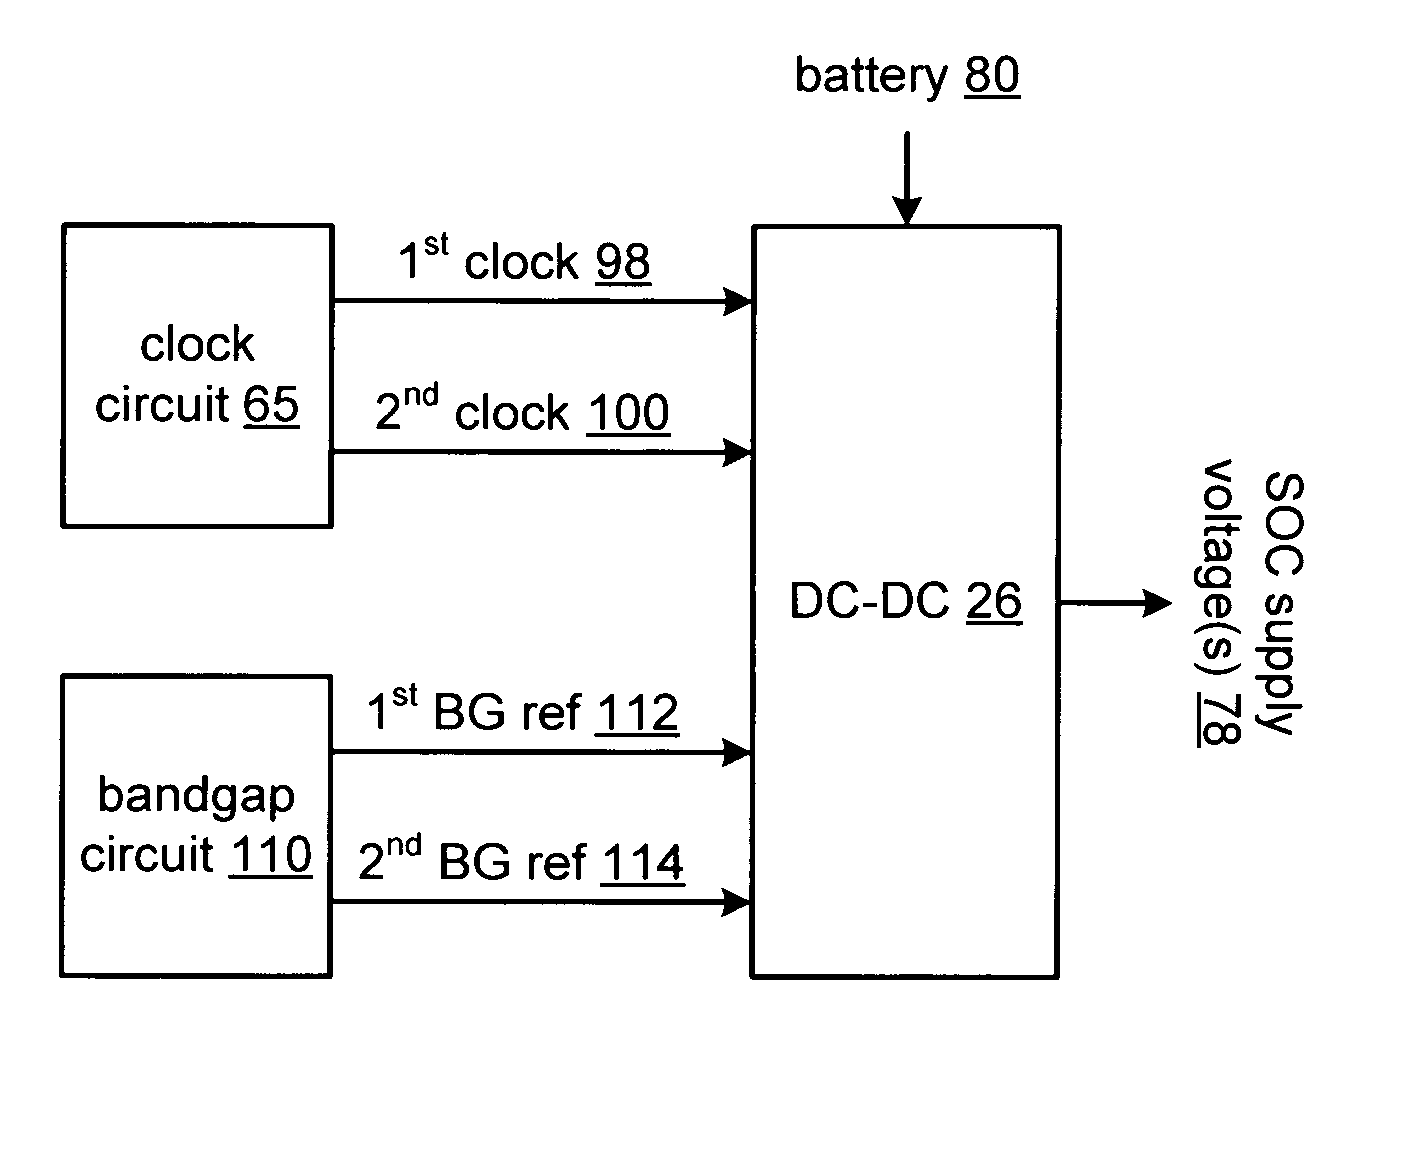 SOC with low power and performance modes